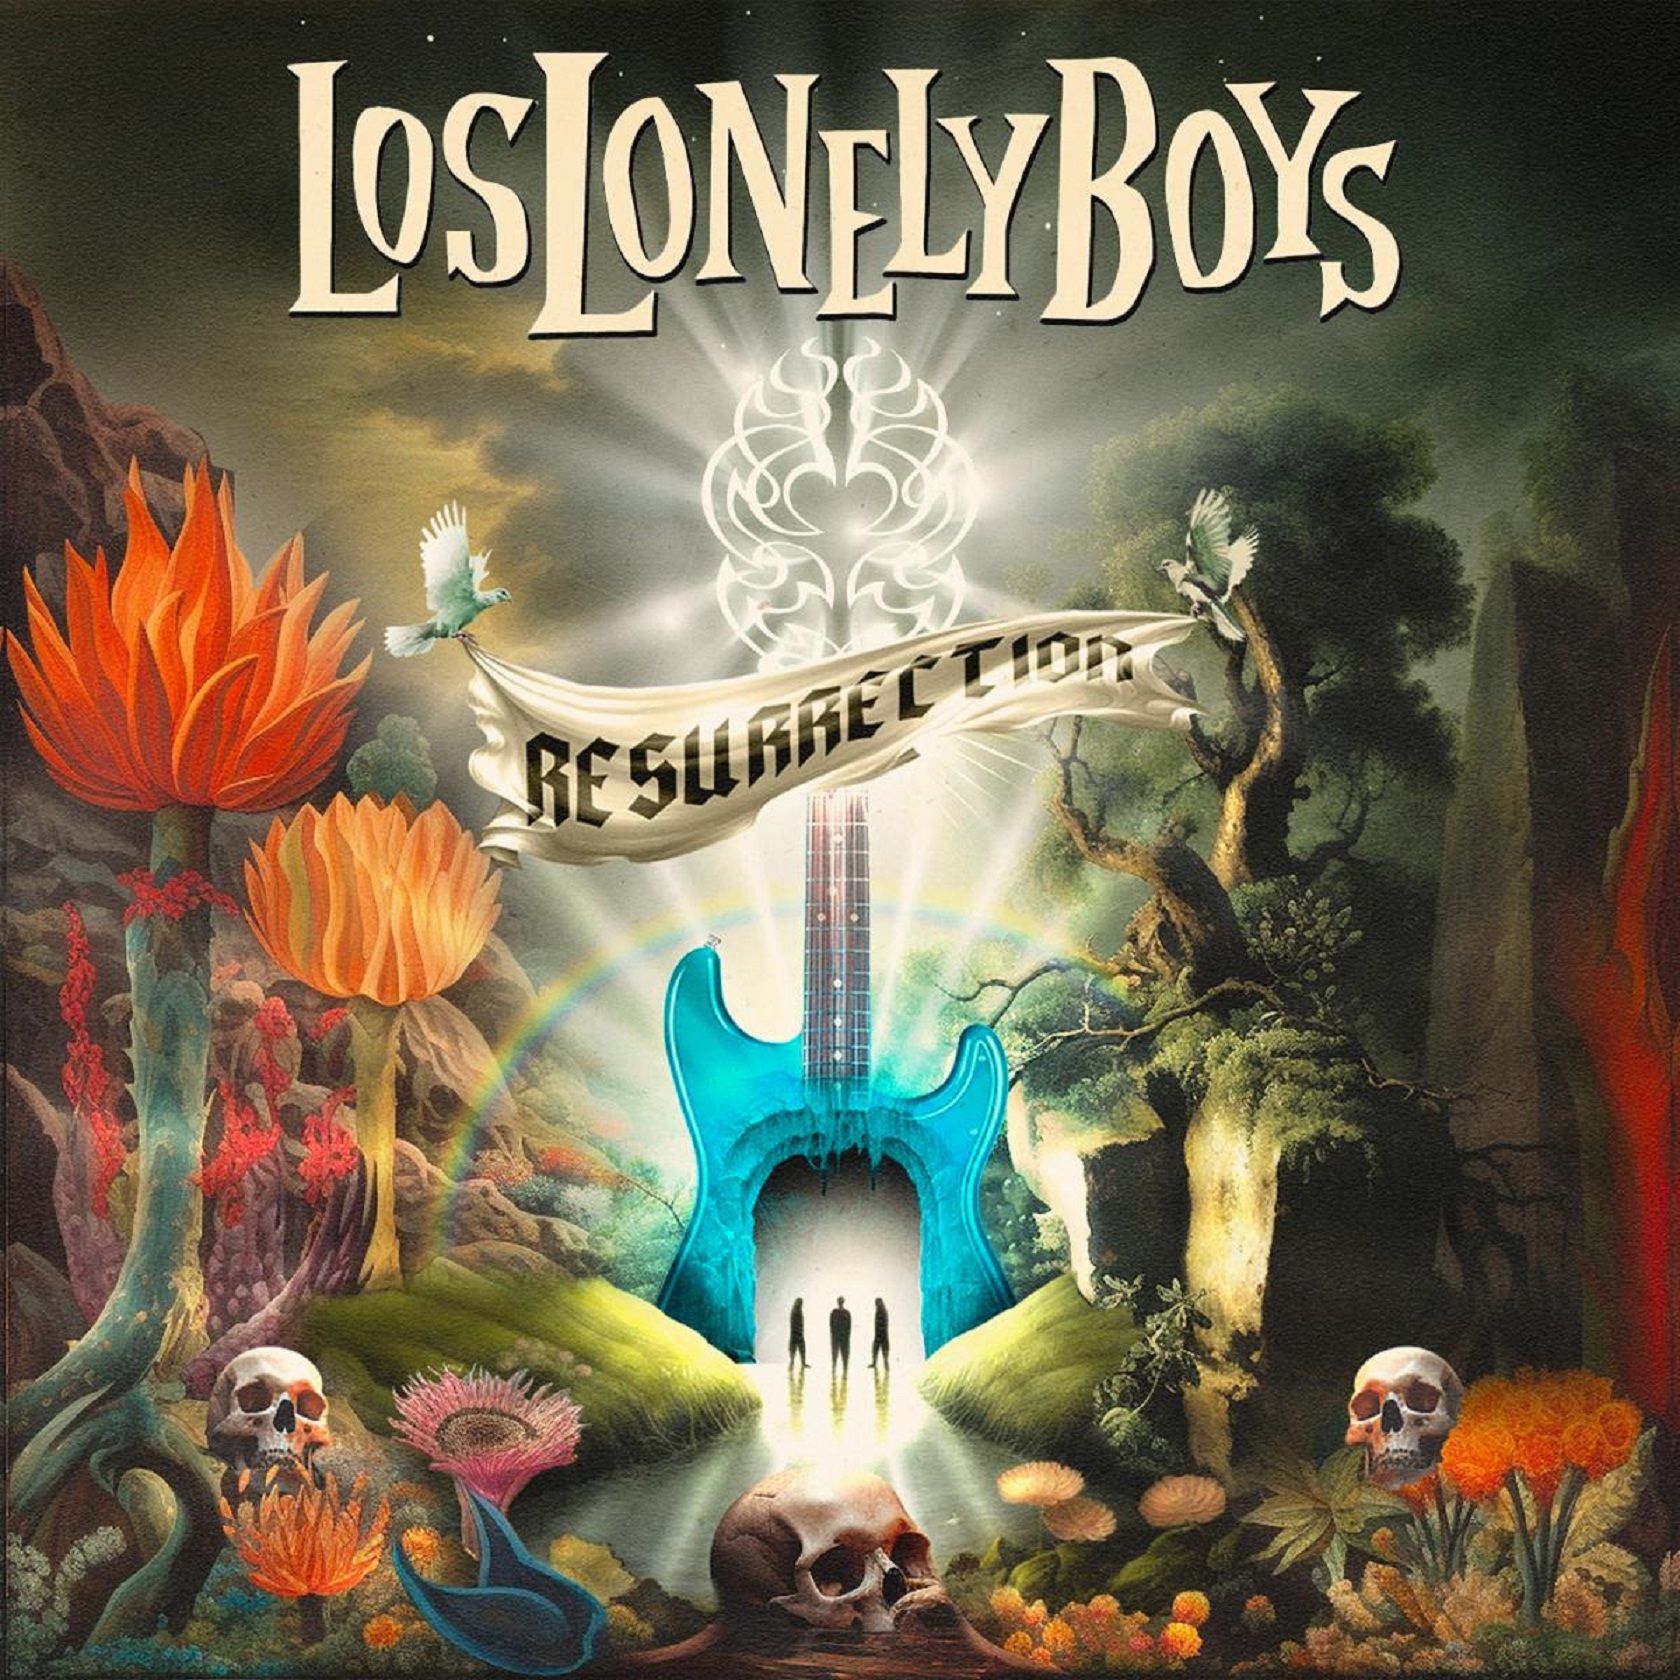 Los Lonely Boys Return with First New Album in 11 Years: Resurrection